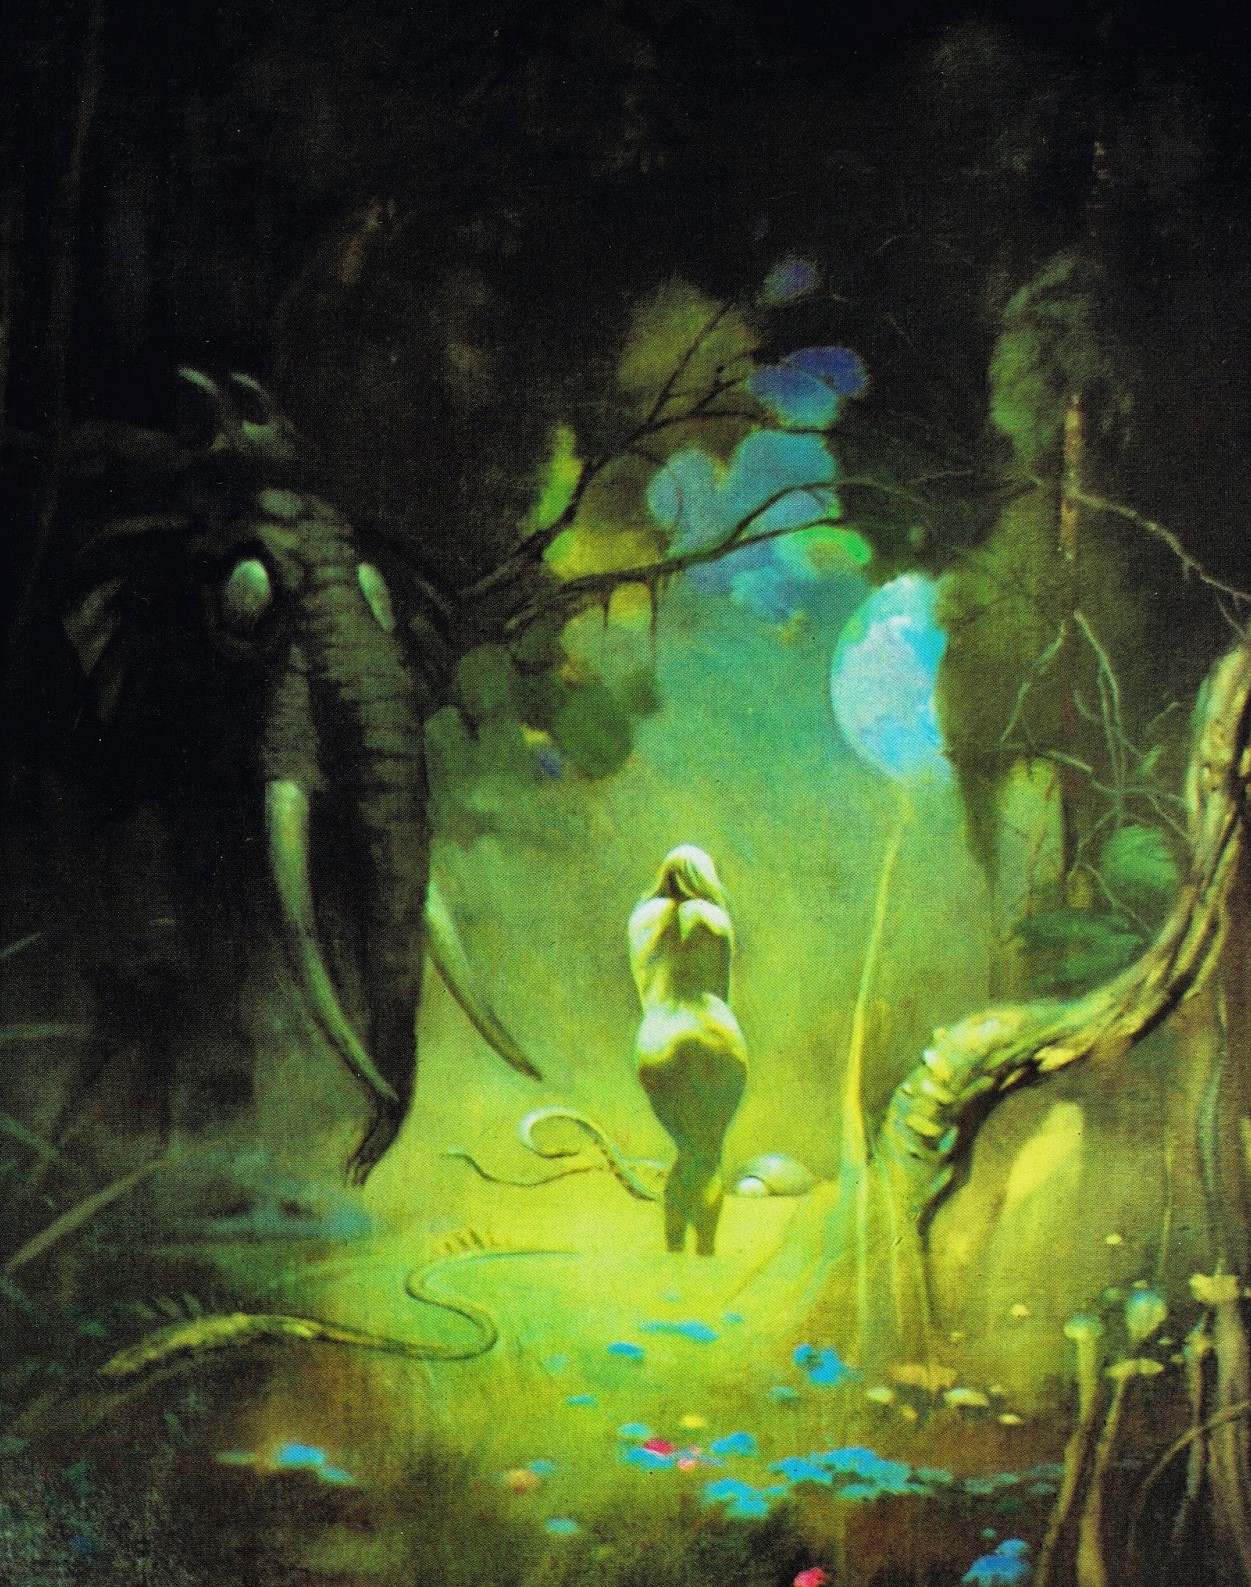 Capns Comics Downward To The Earth By Frank Frazetta